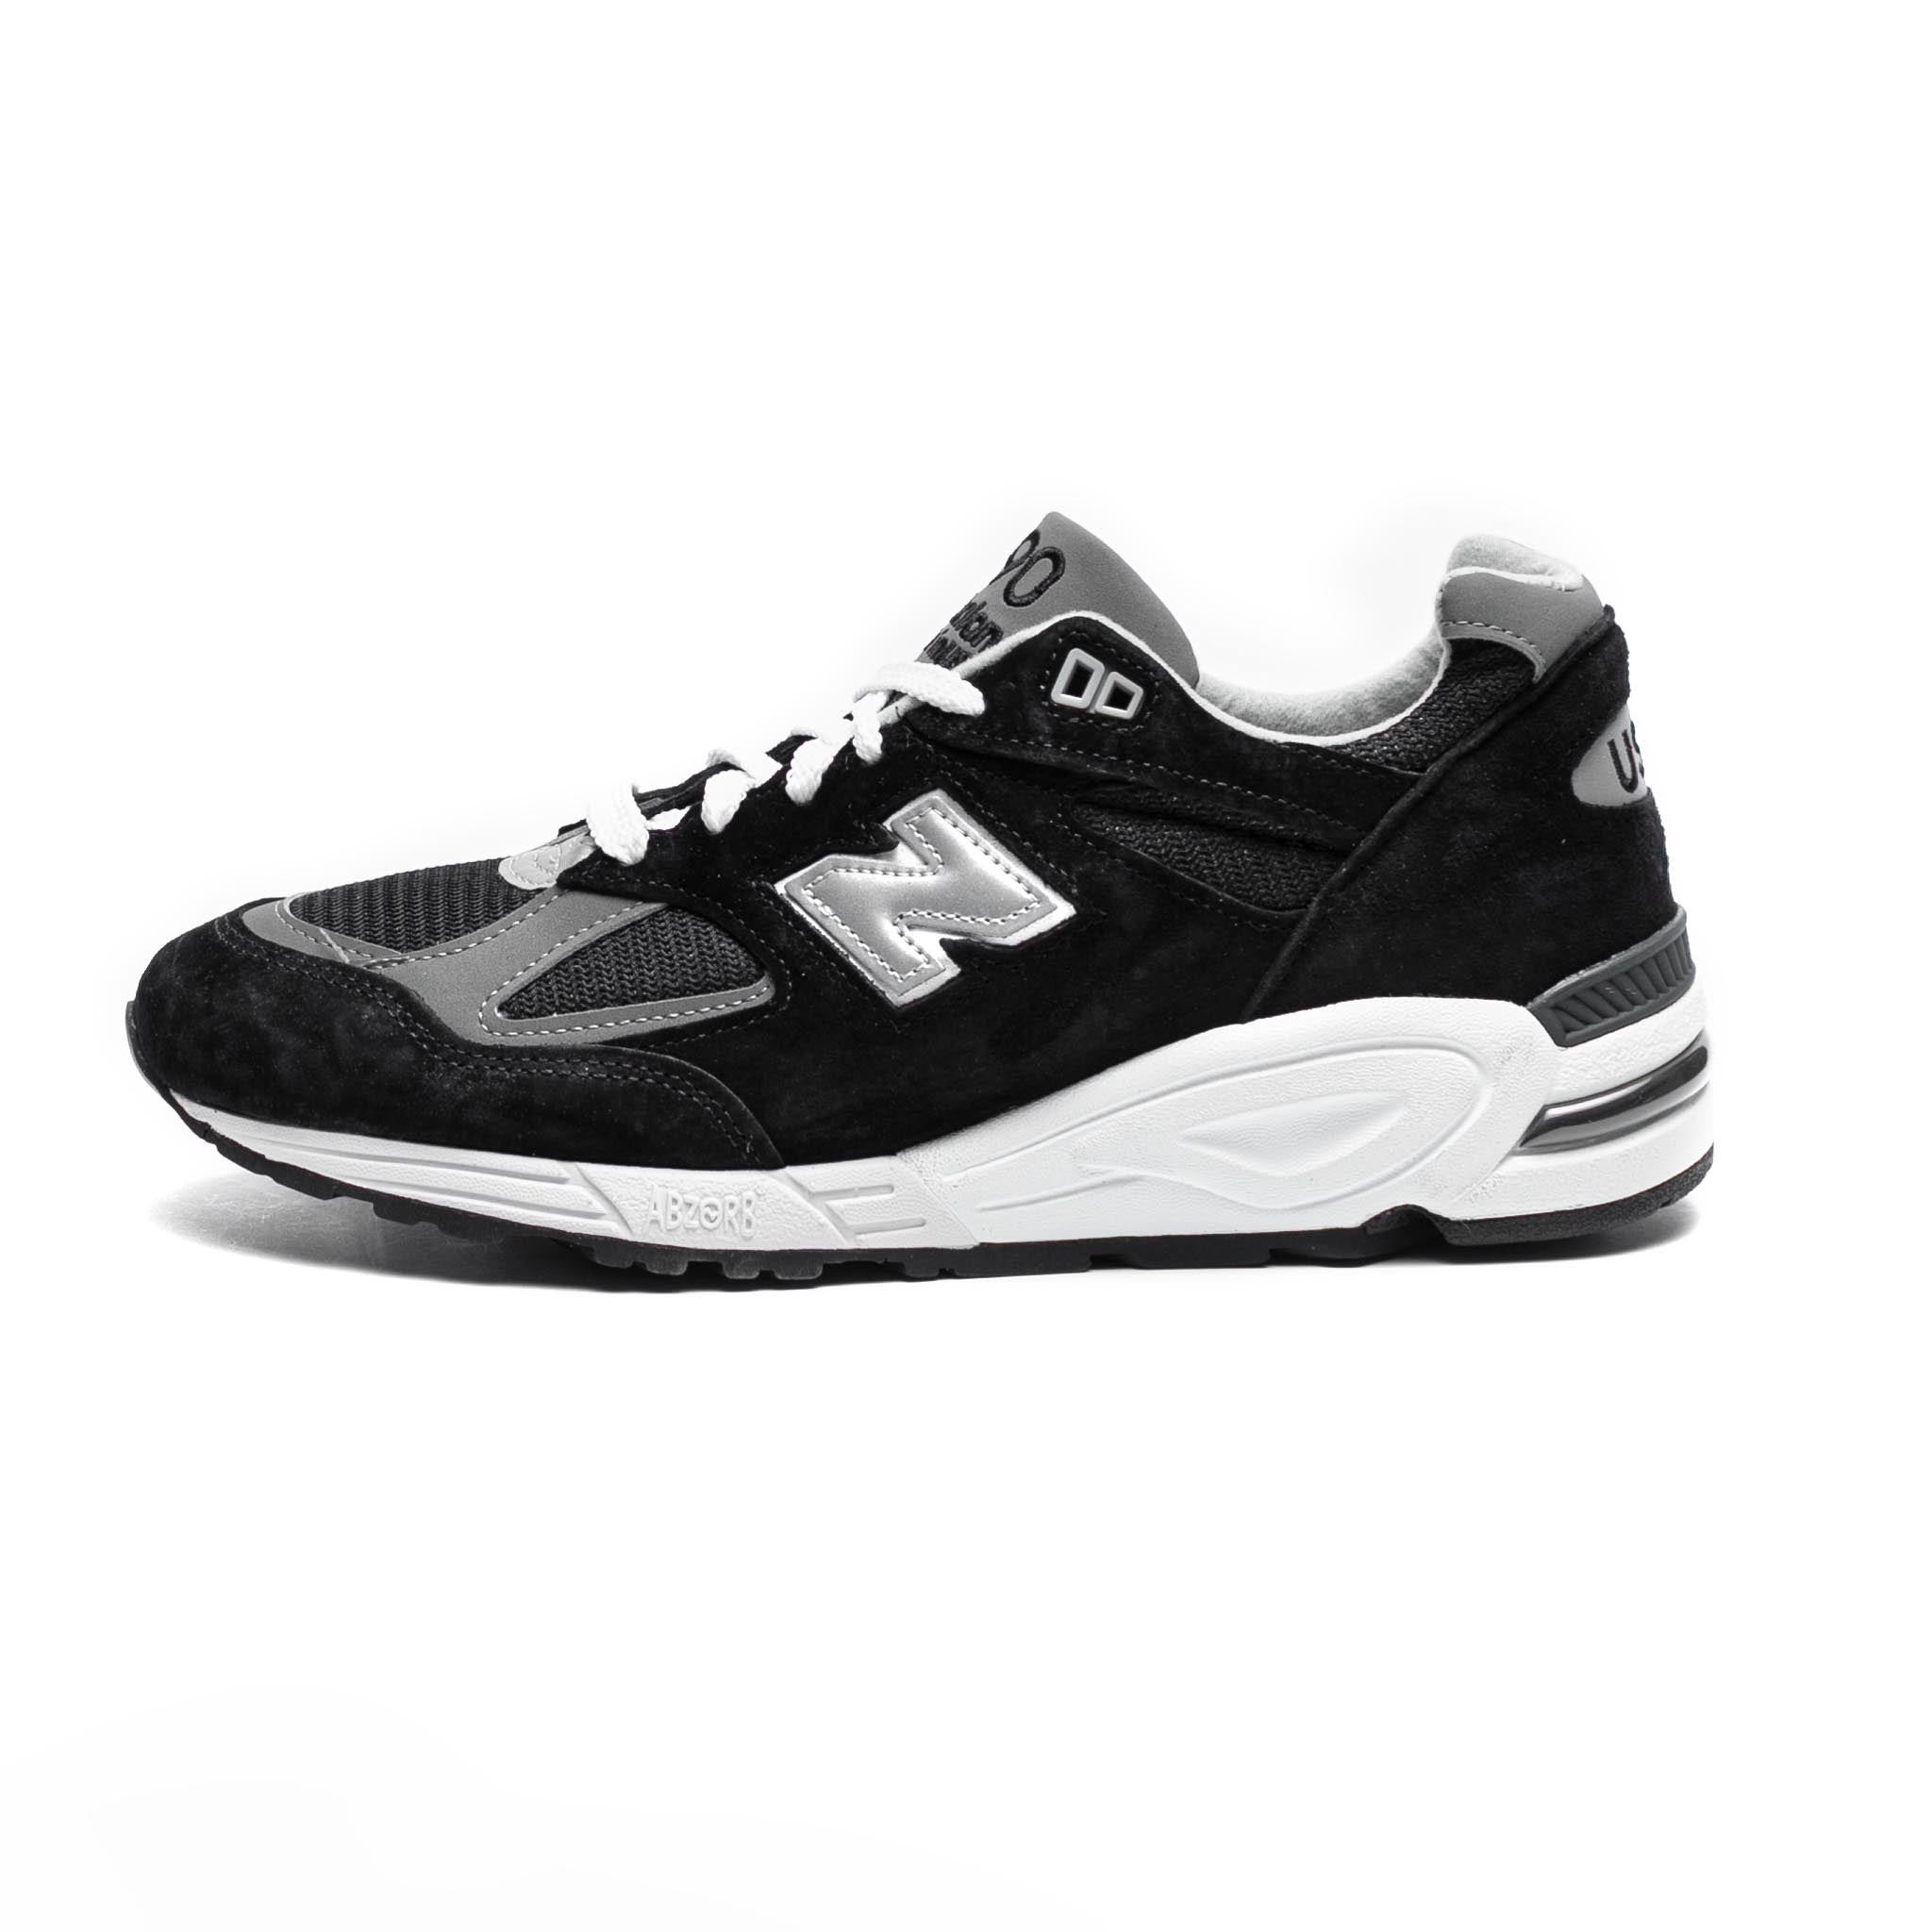 New Balance 'Made in the USA' M990BL2 Black